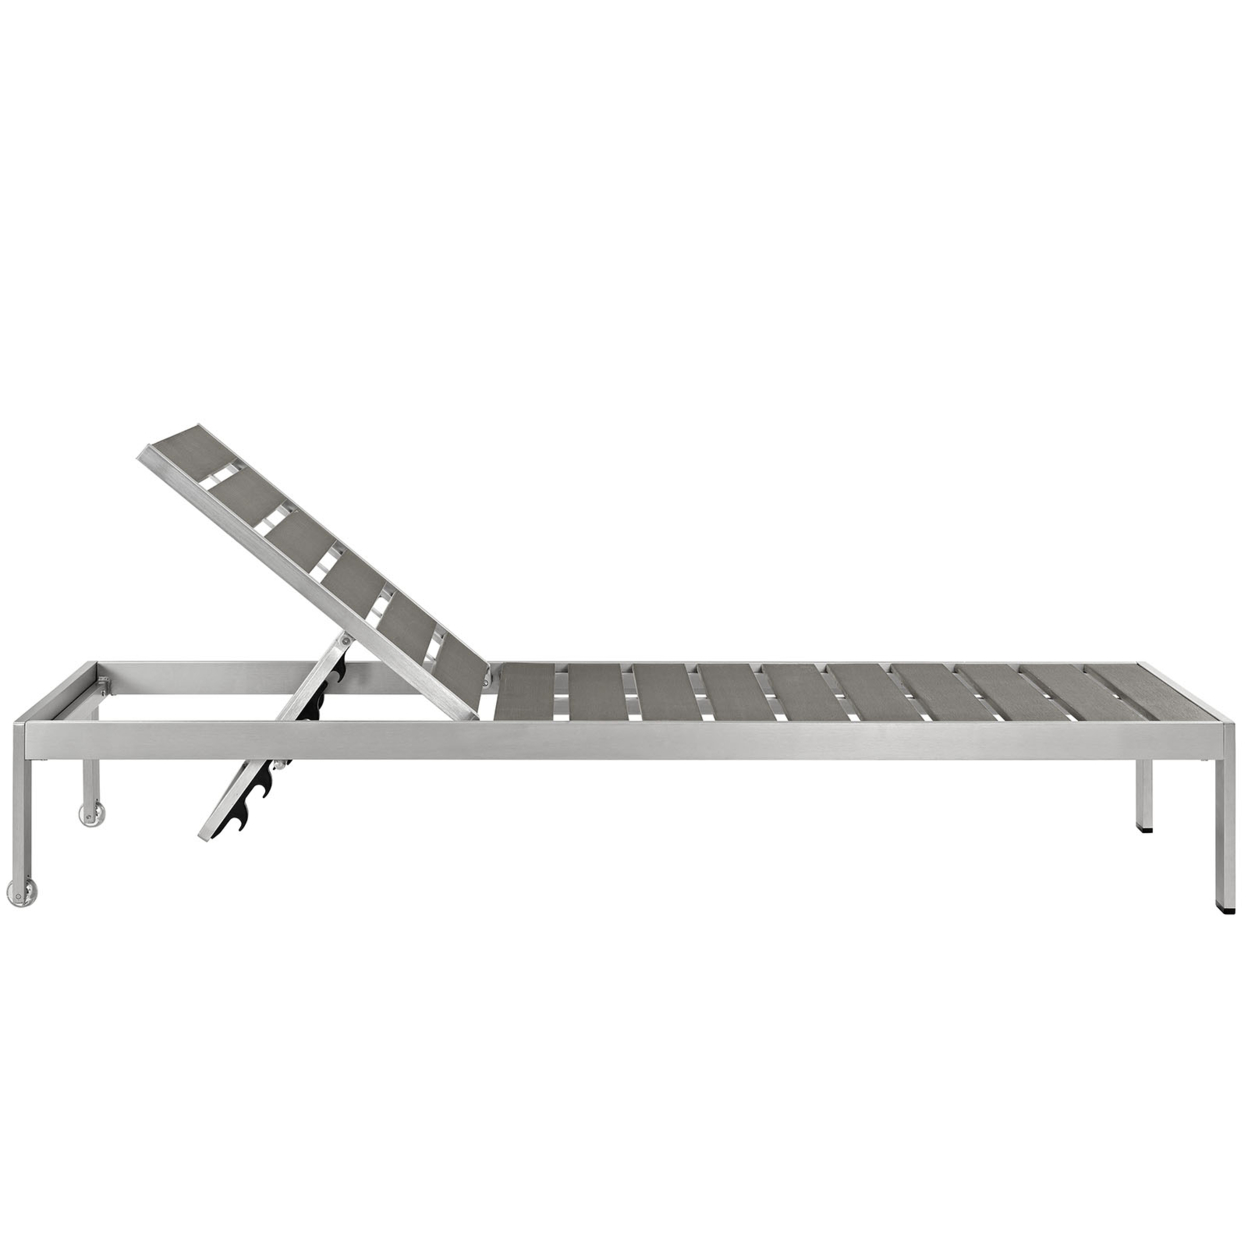 Shore Set Of 2 Outdoor Patio Aluminum Chaise, Silver Gray Size : 76Lx25Wx12H